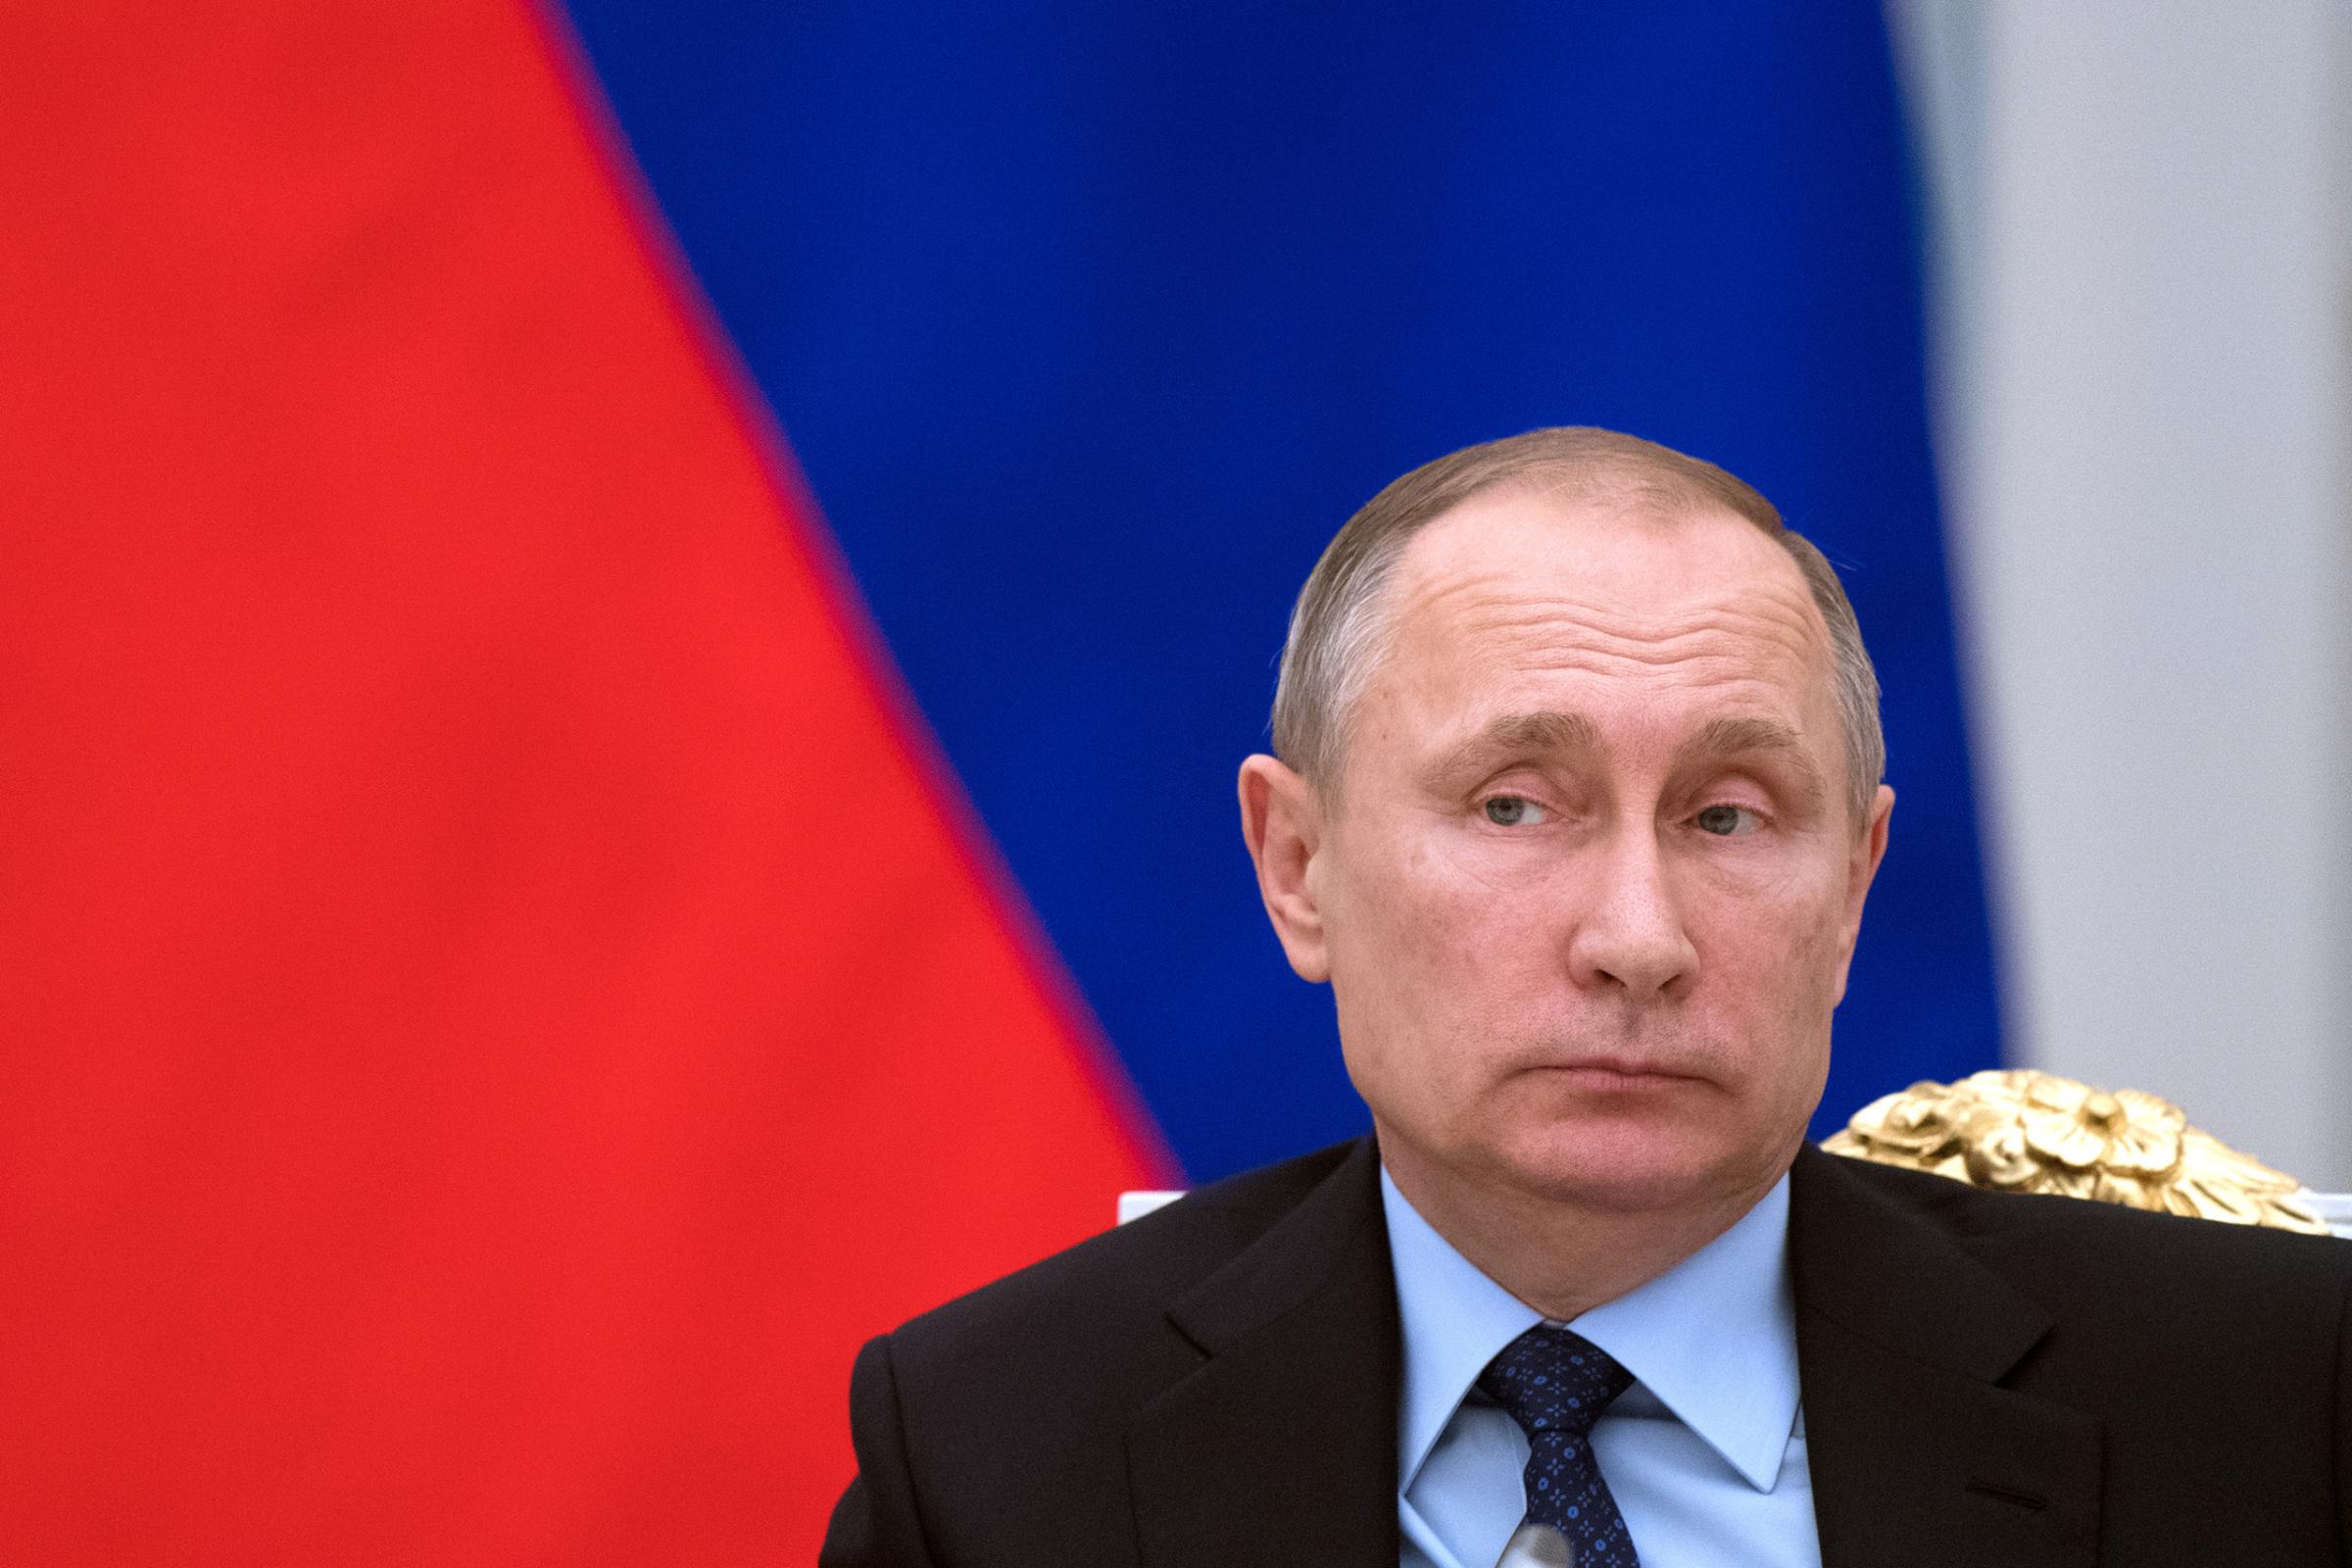 Vladimir Putin meets with Russian Federation Council and State D